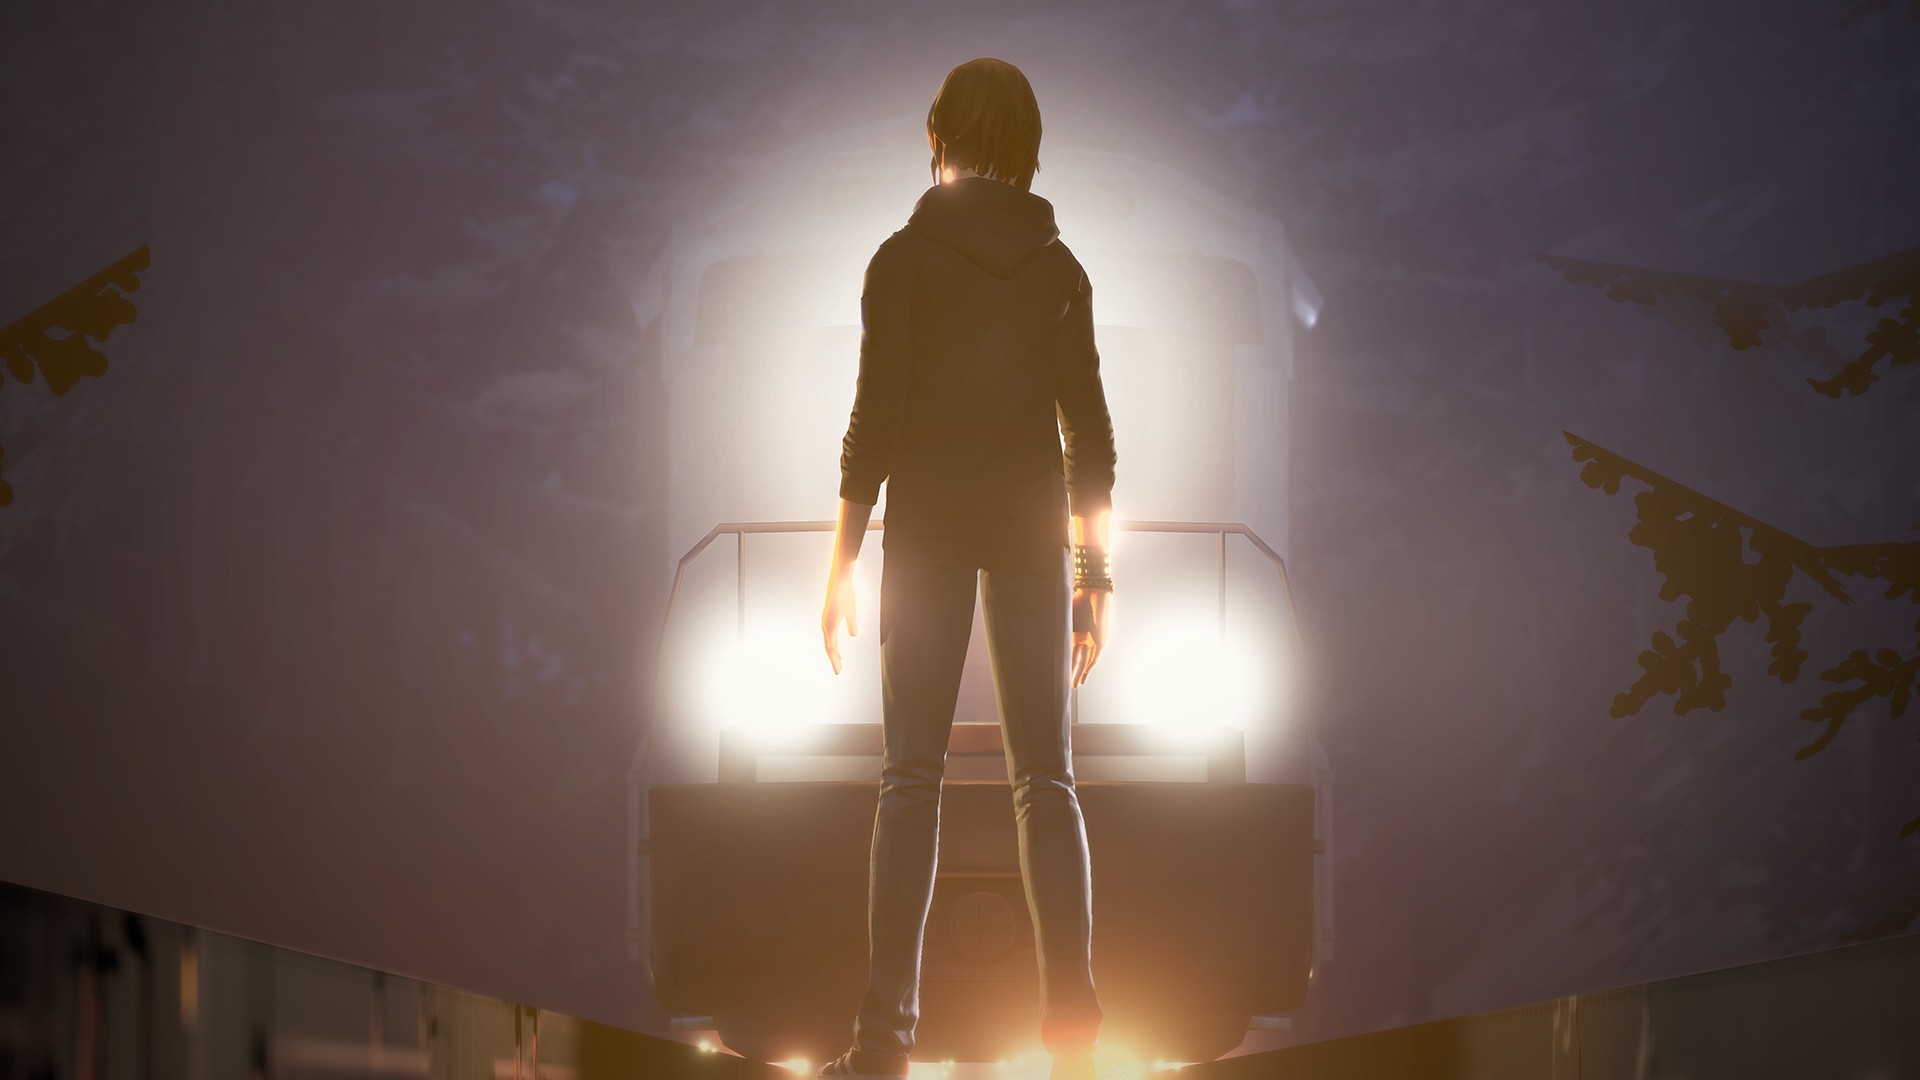 5 Reasons Tell Me Why Is The Better Game (& 5 Why It's Life Is Strange)